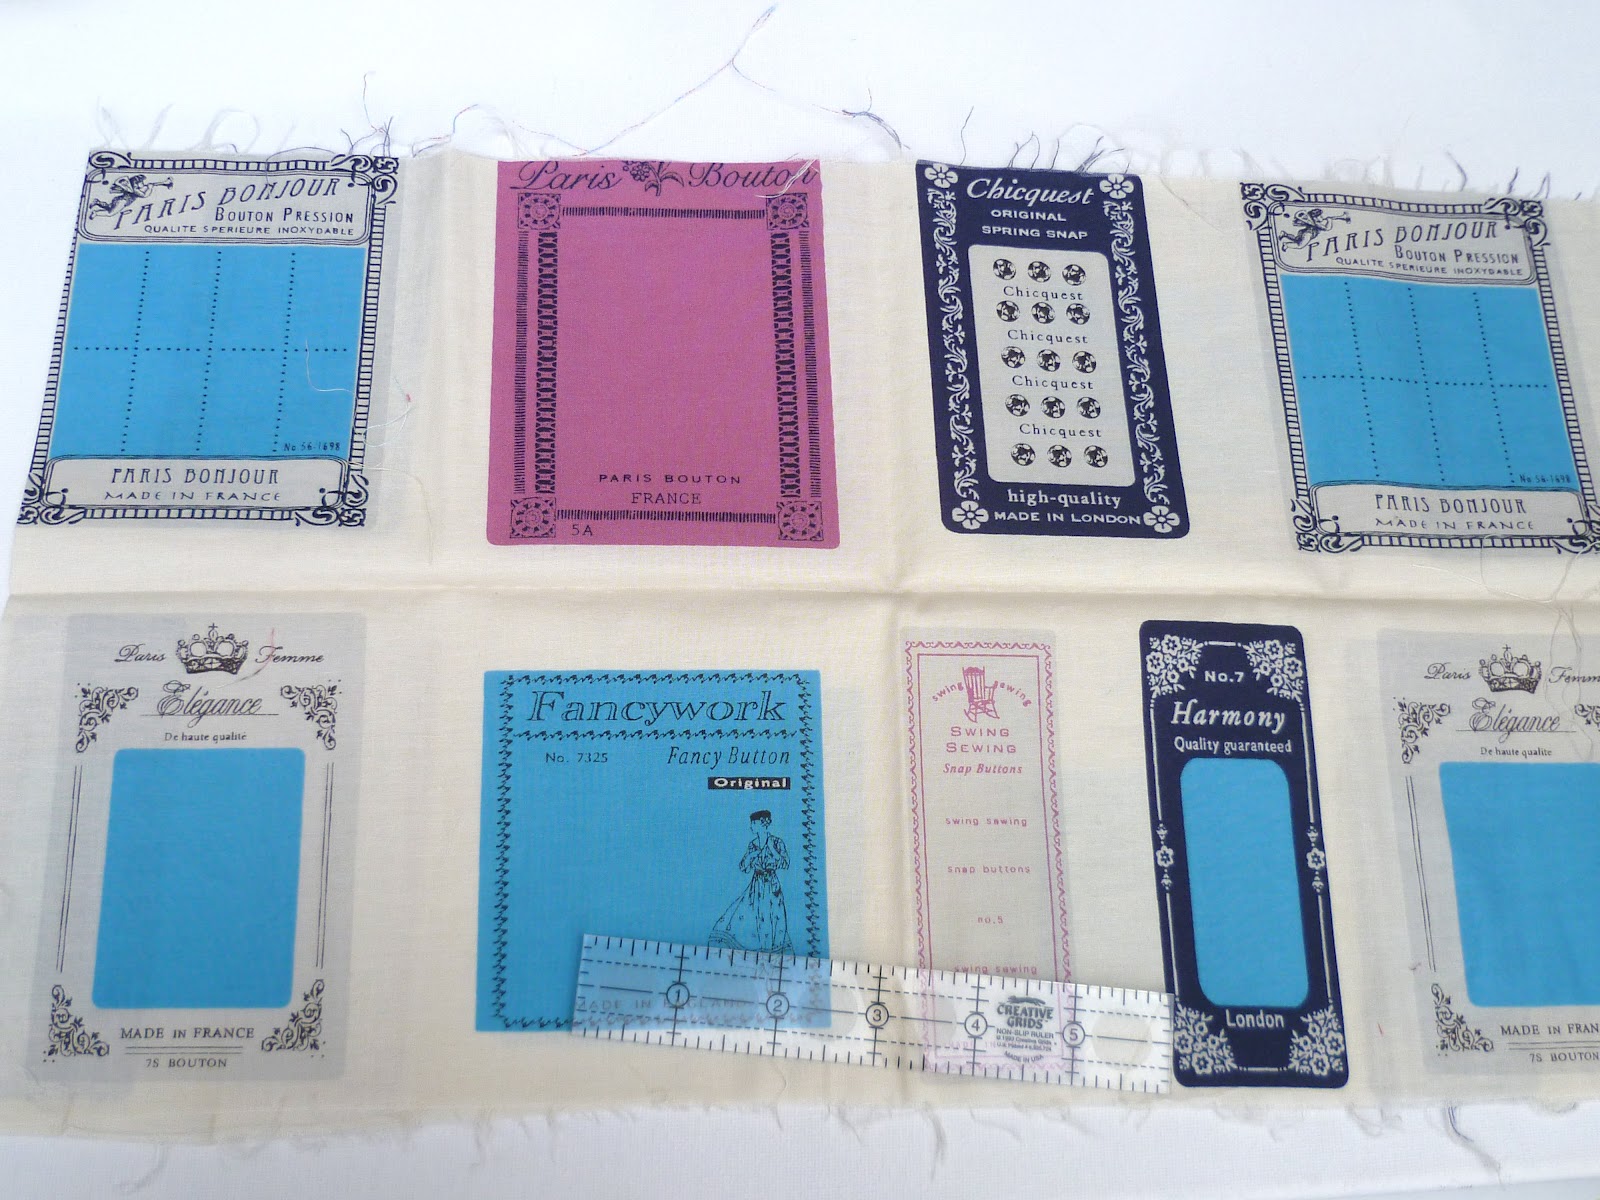 verykerryberry: Destash: Quilting Books and Fabric